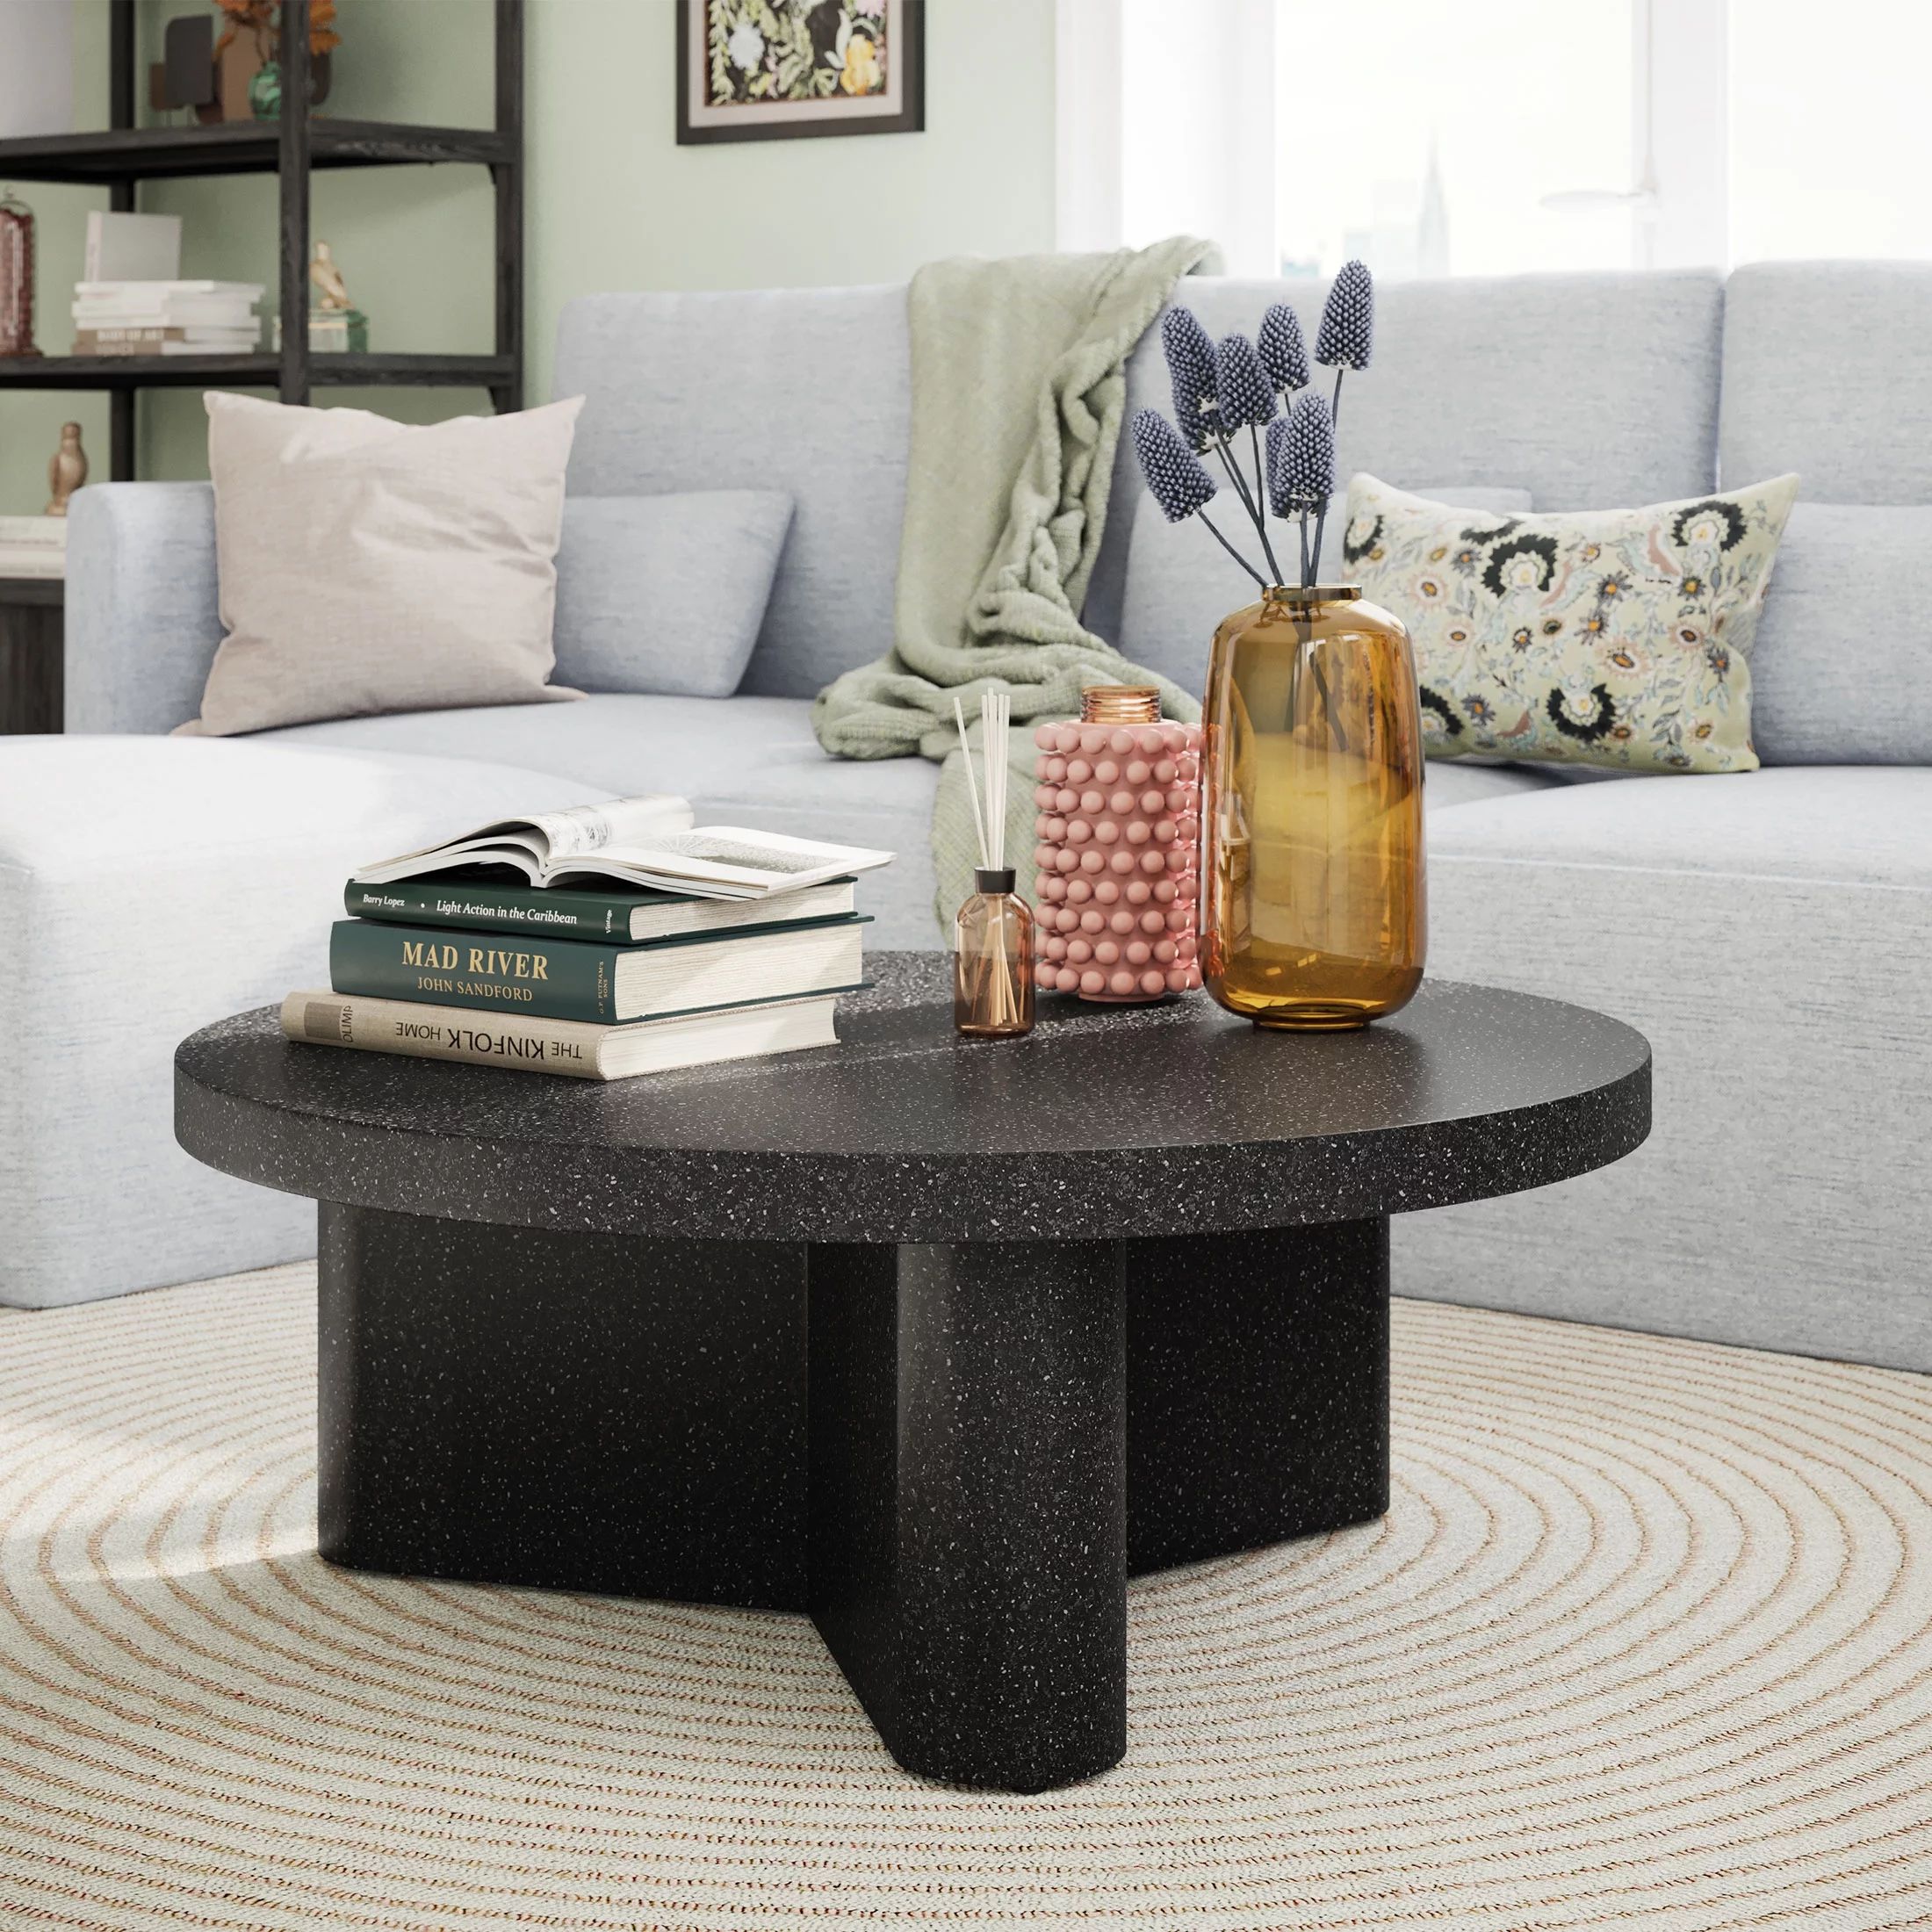 Beautiful Contempo Round Coffee Table Finish by Drew Barrymore, Speckled Marble Finish | Walmart (US)